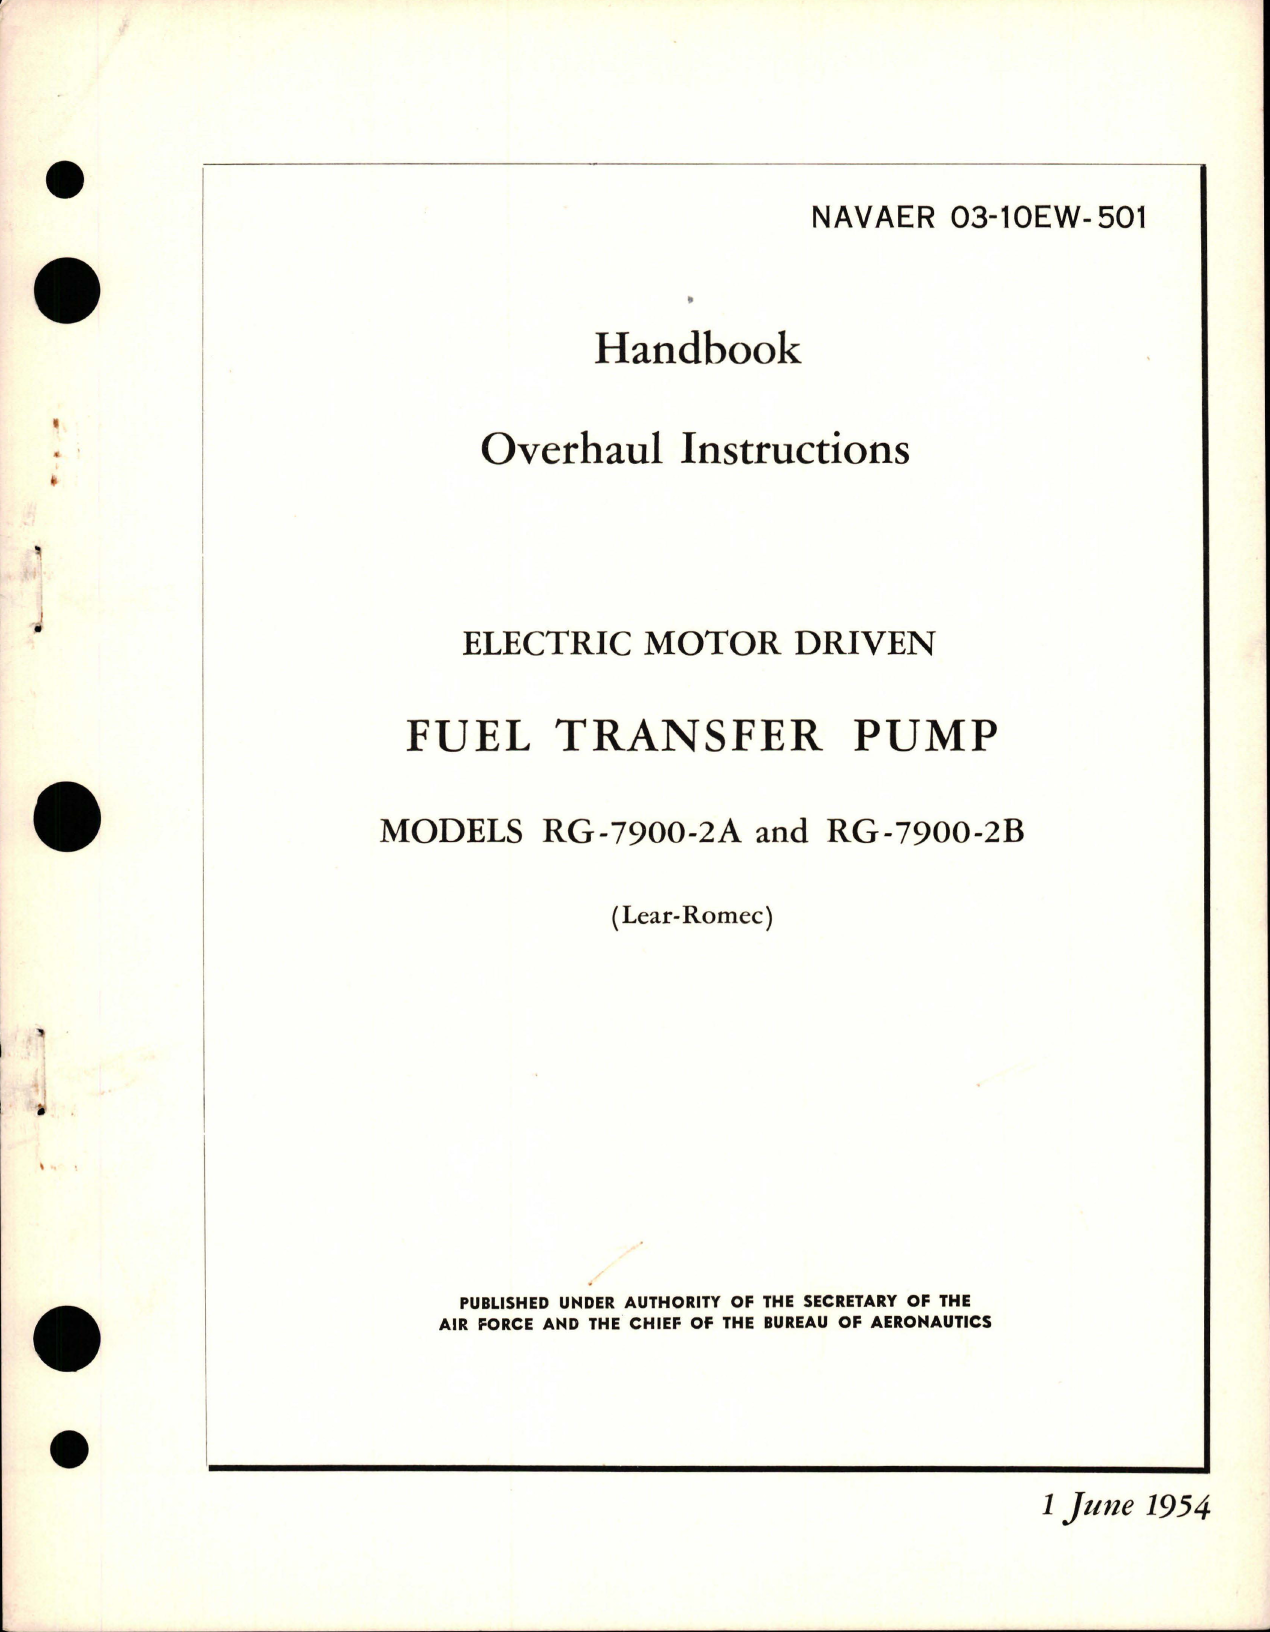 Sample page 1 from AirCorps Library document: Overhaul Instructions for Fuel Transfer Pump - Electric Motor Driven - Models RG-7900-2A, RG-7900-2B 